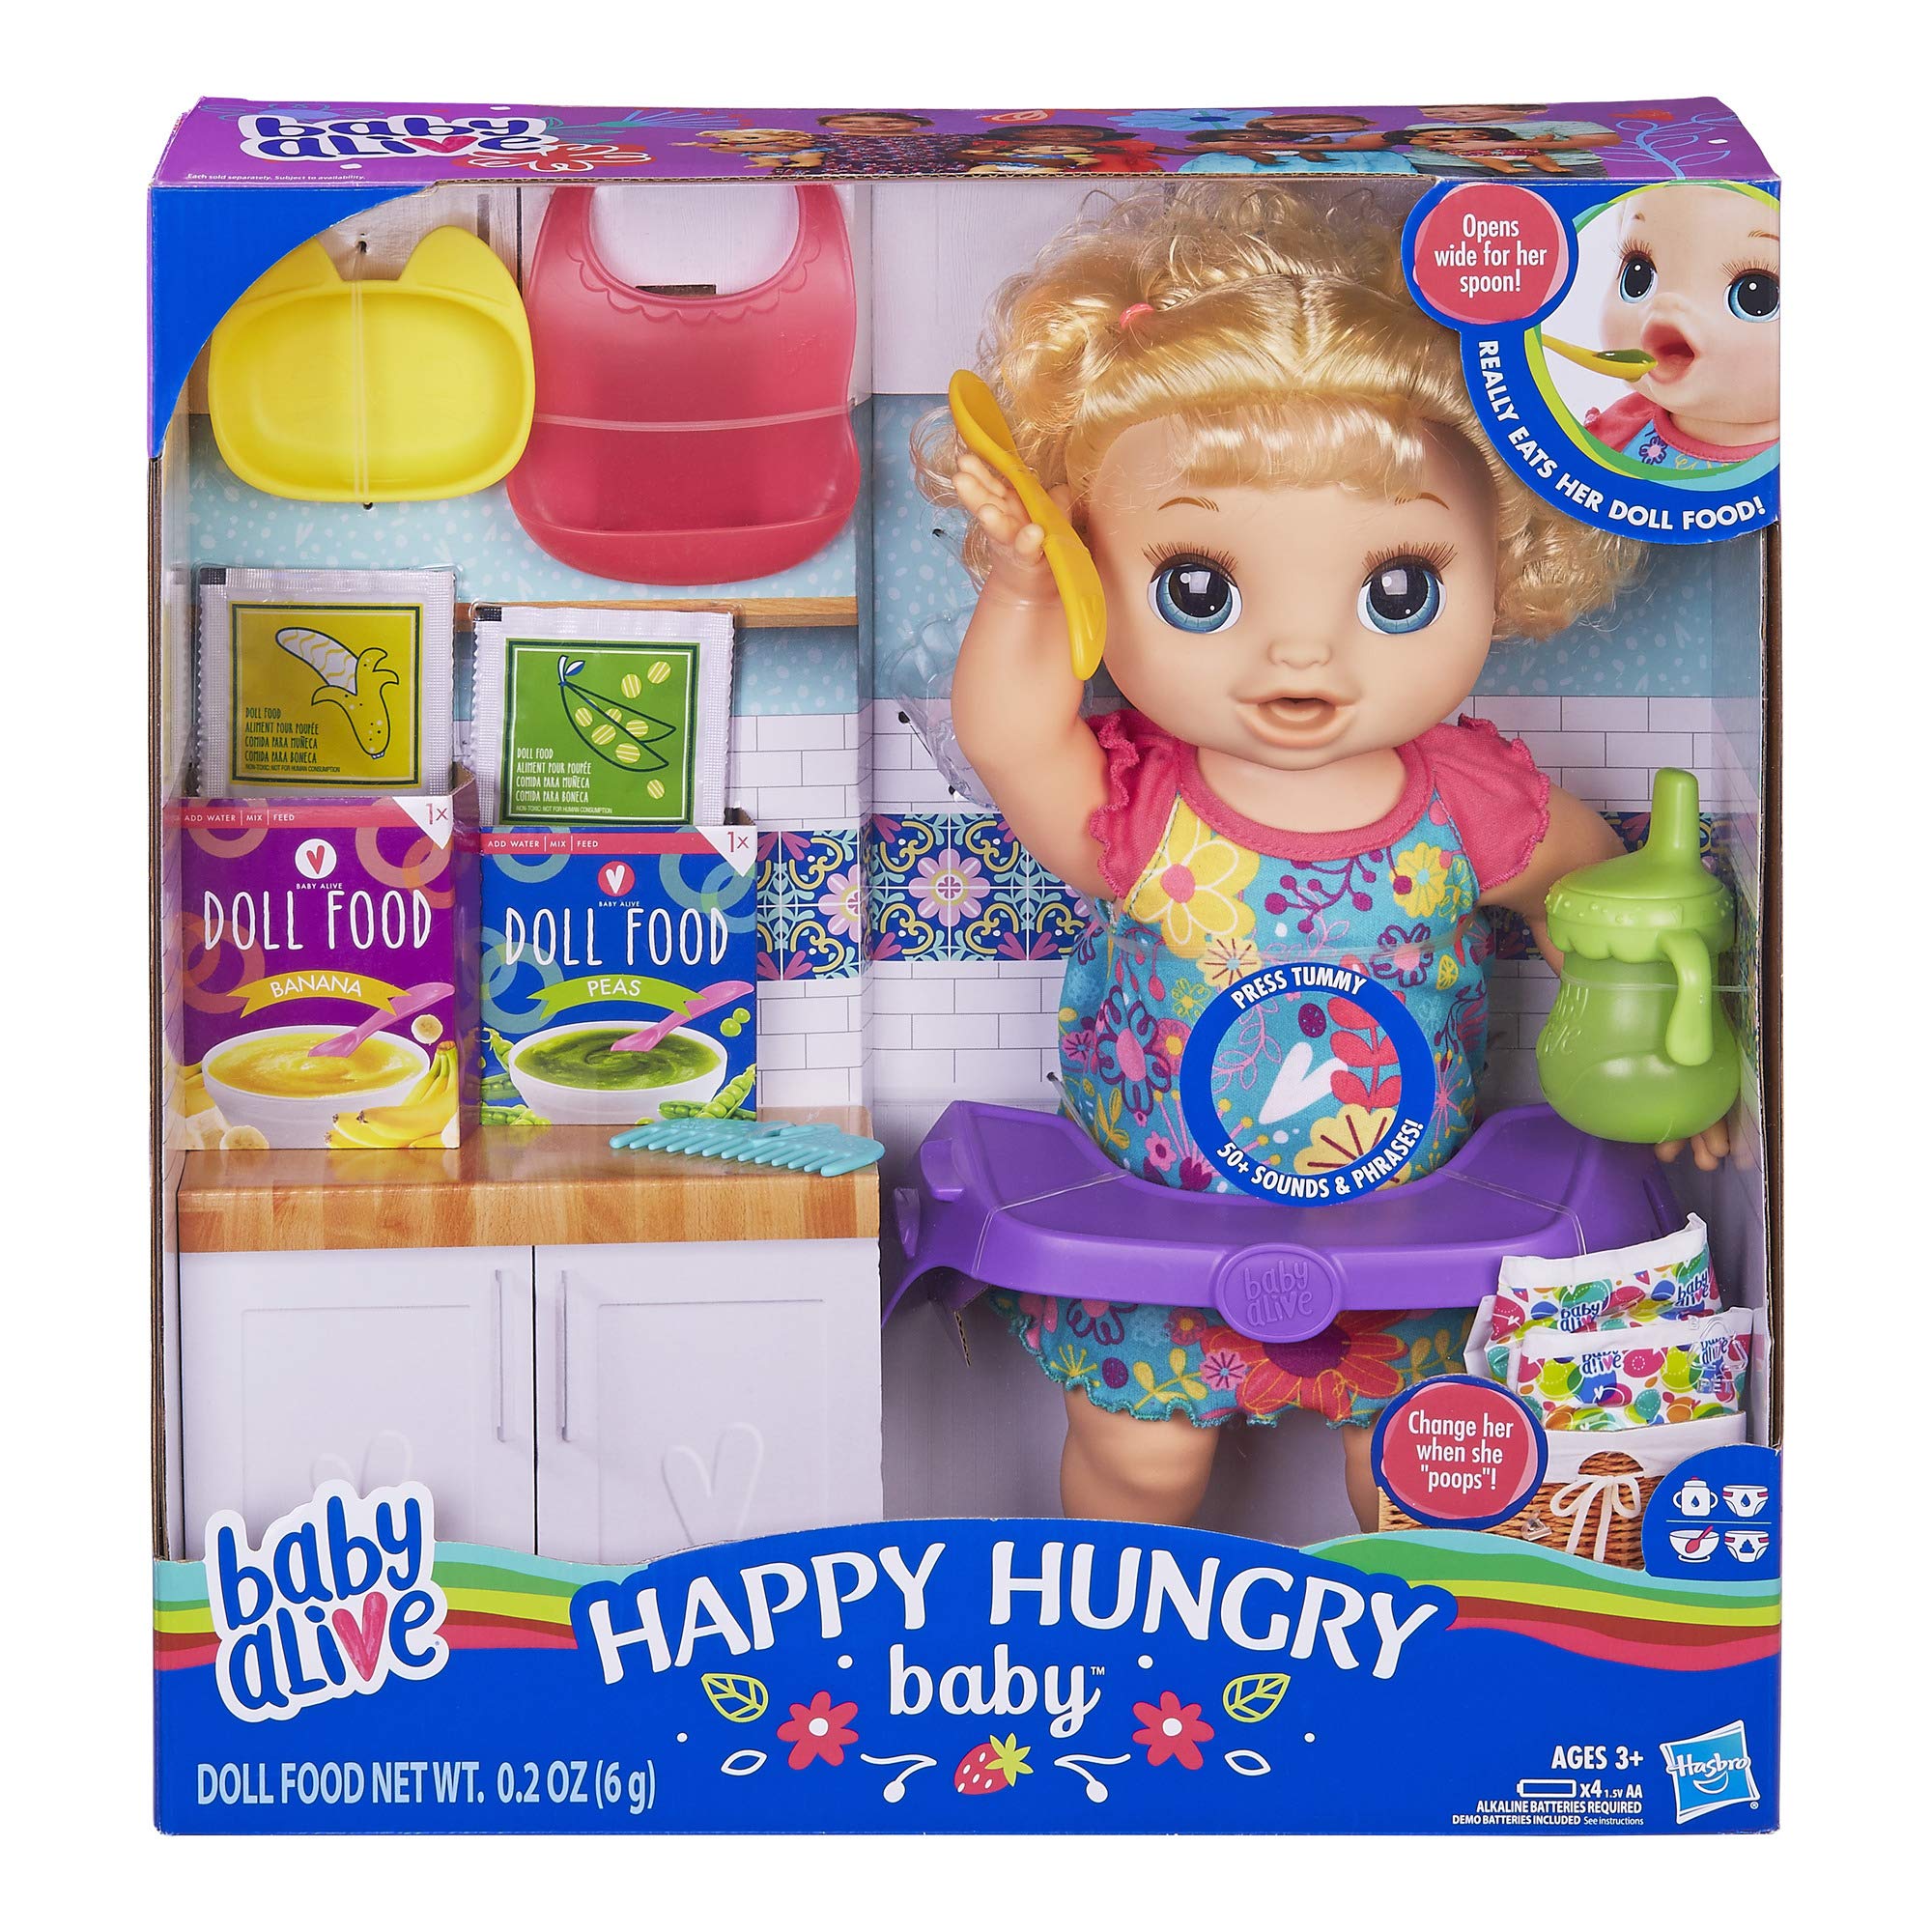 baby dolls that eat and drink